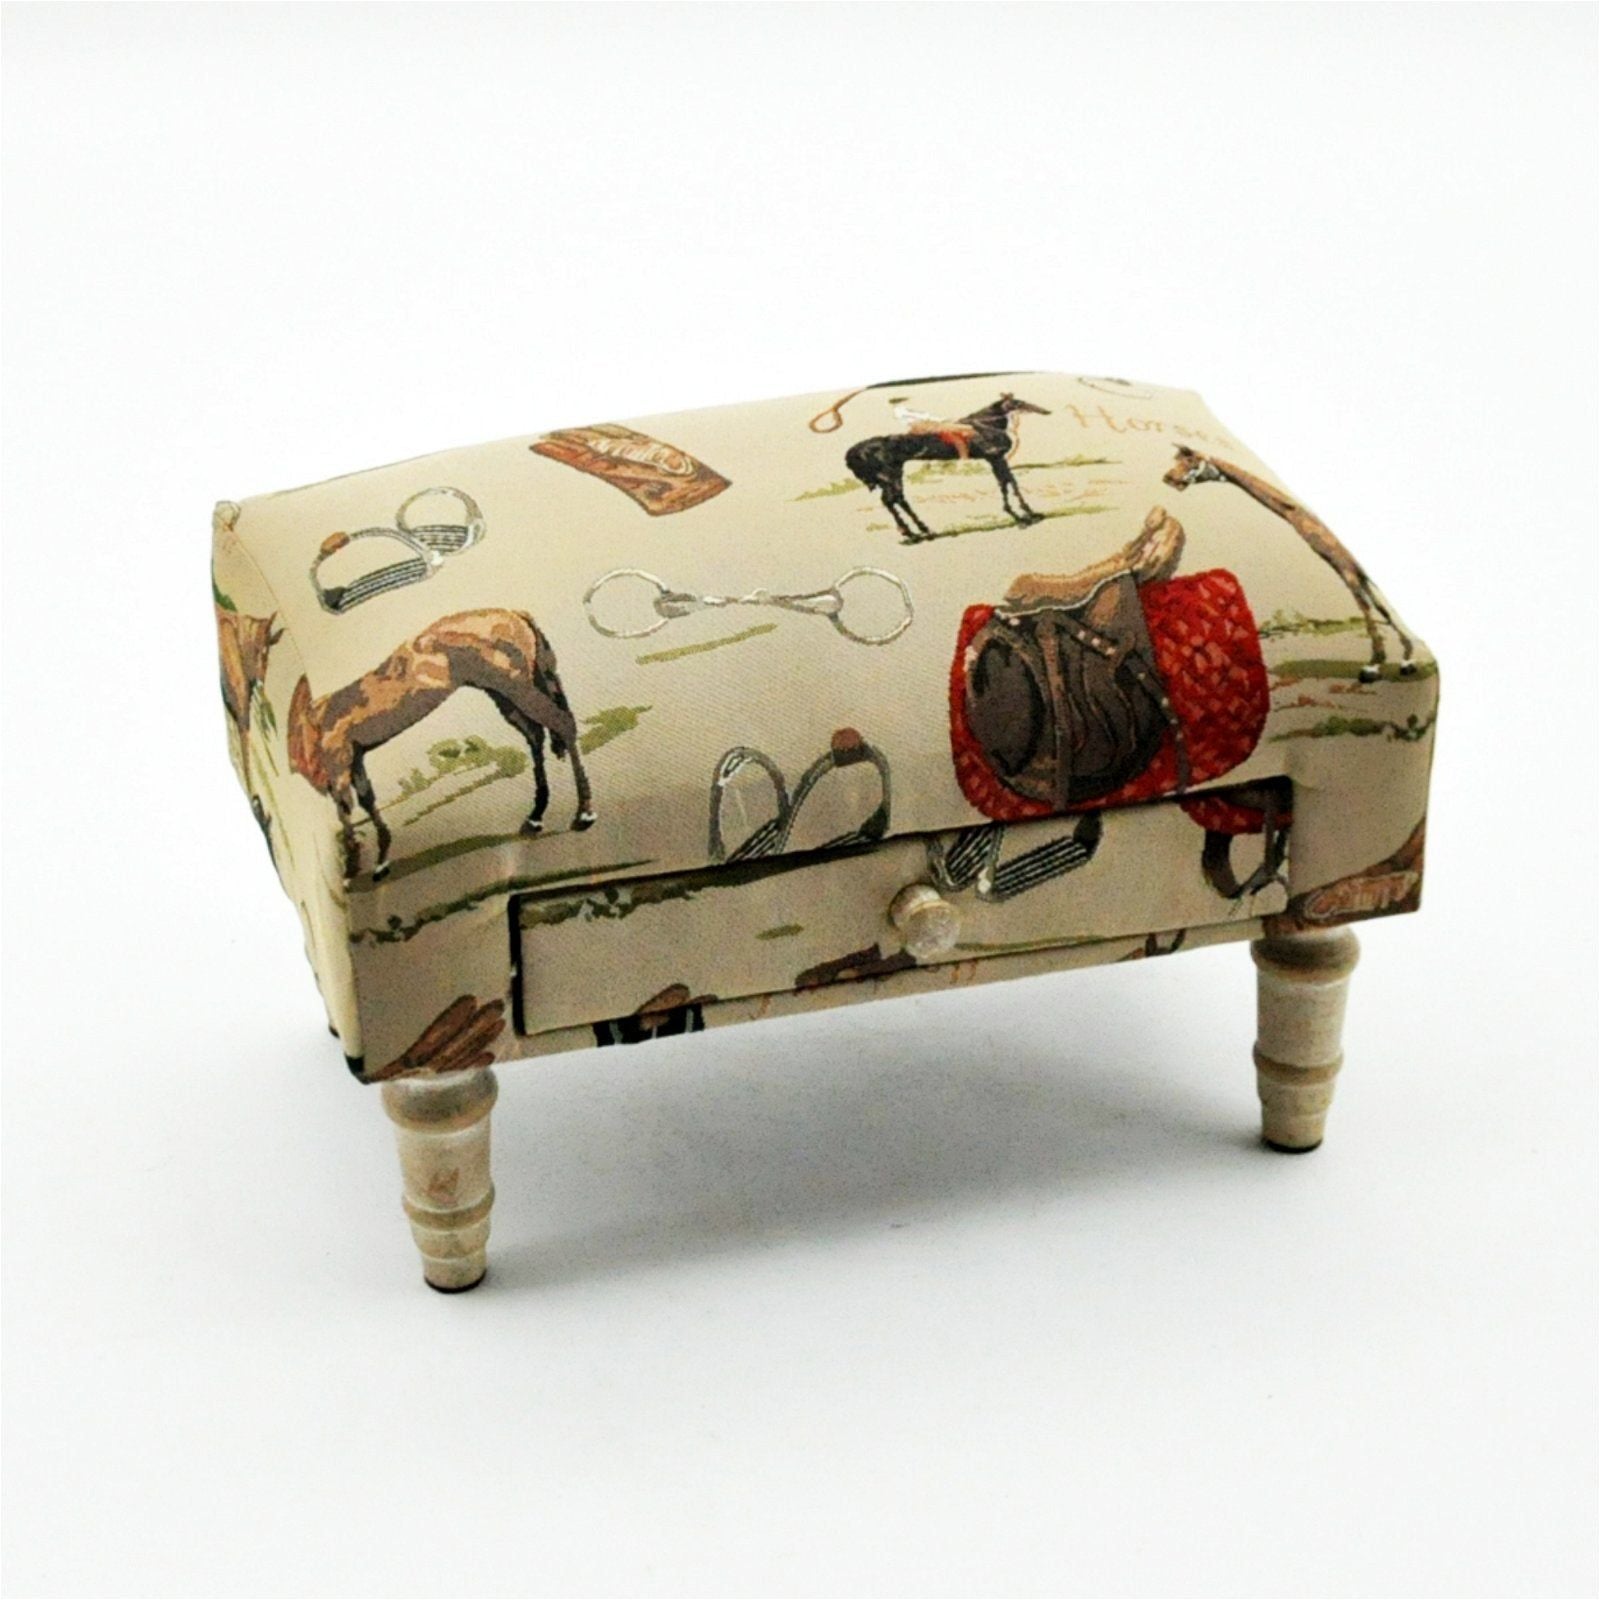 Equestrian Fabric Footstool with Drawer - Ashton and Finch